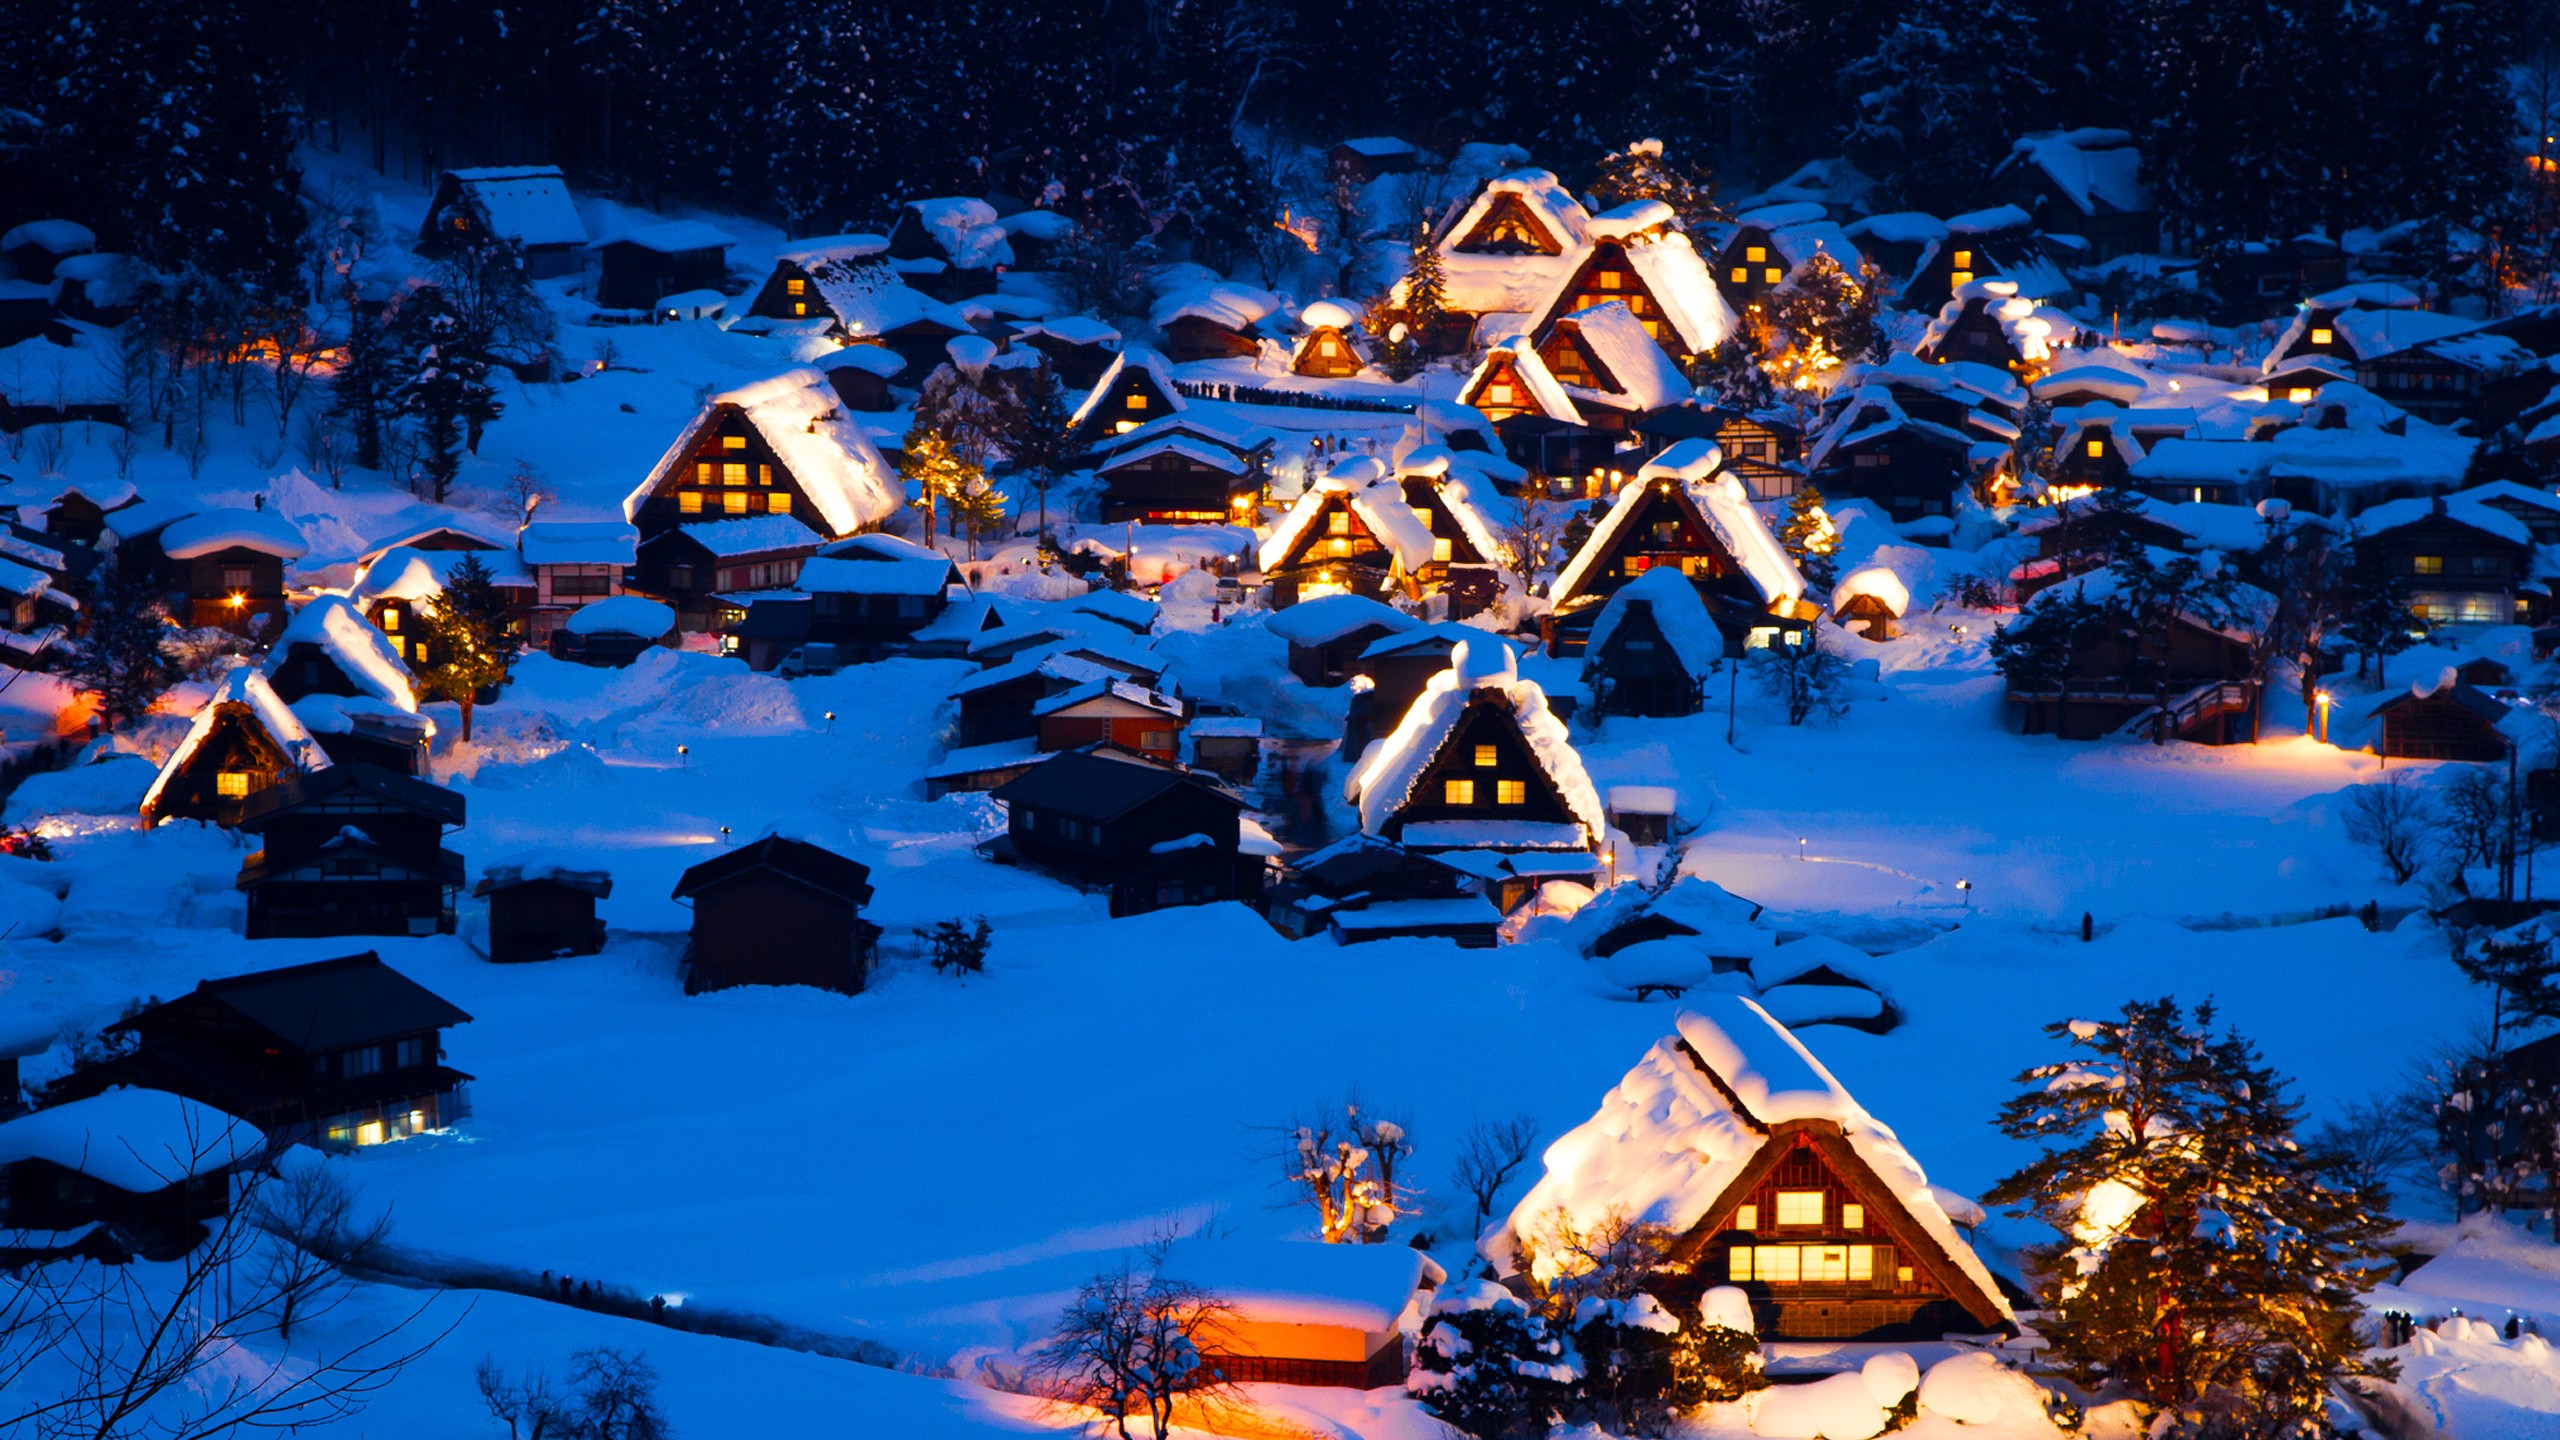 General 2560x1440 village winter lights snow cold outdoors